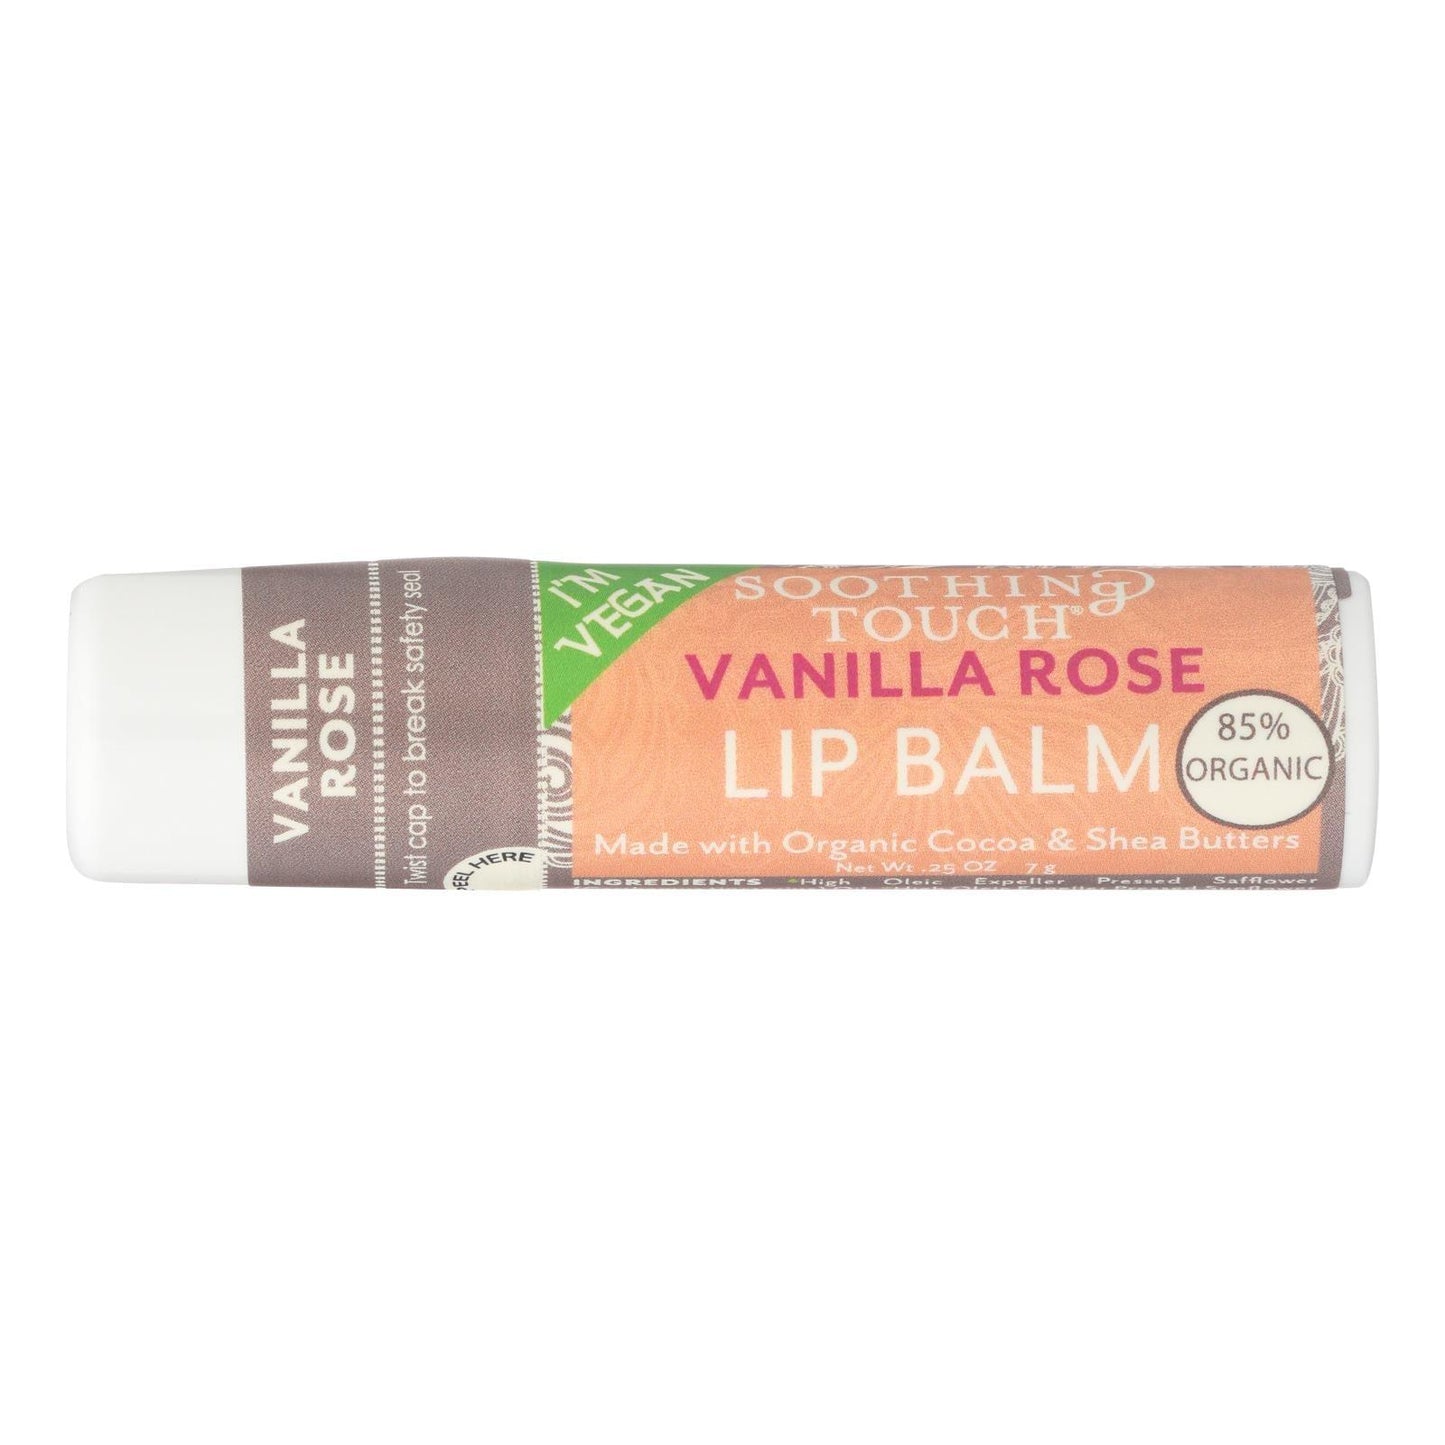 Soothing Touch Vanilla Rose Lip Balm Moisturizes And - Case Of 12 - .25 Oz - Loomini